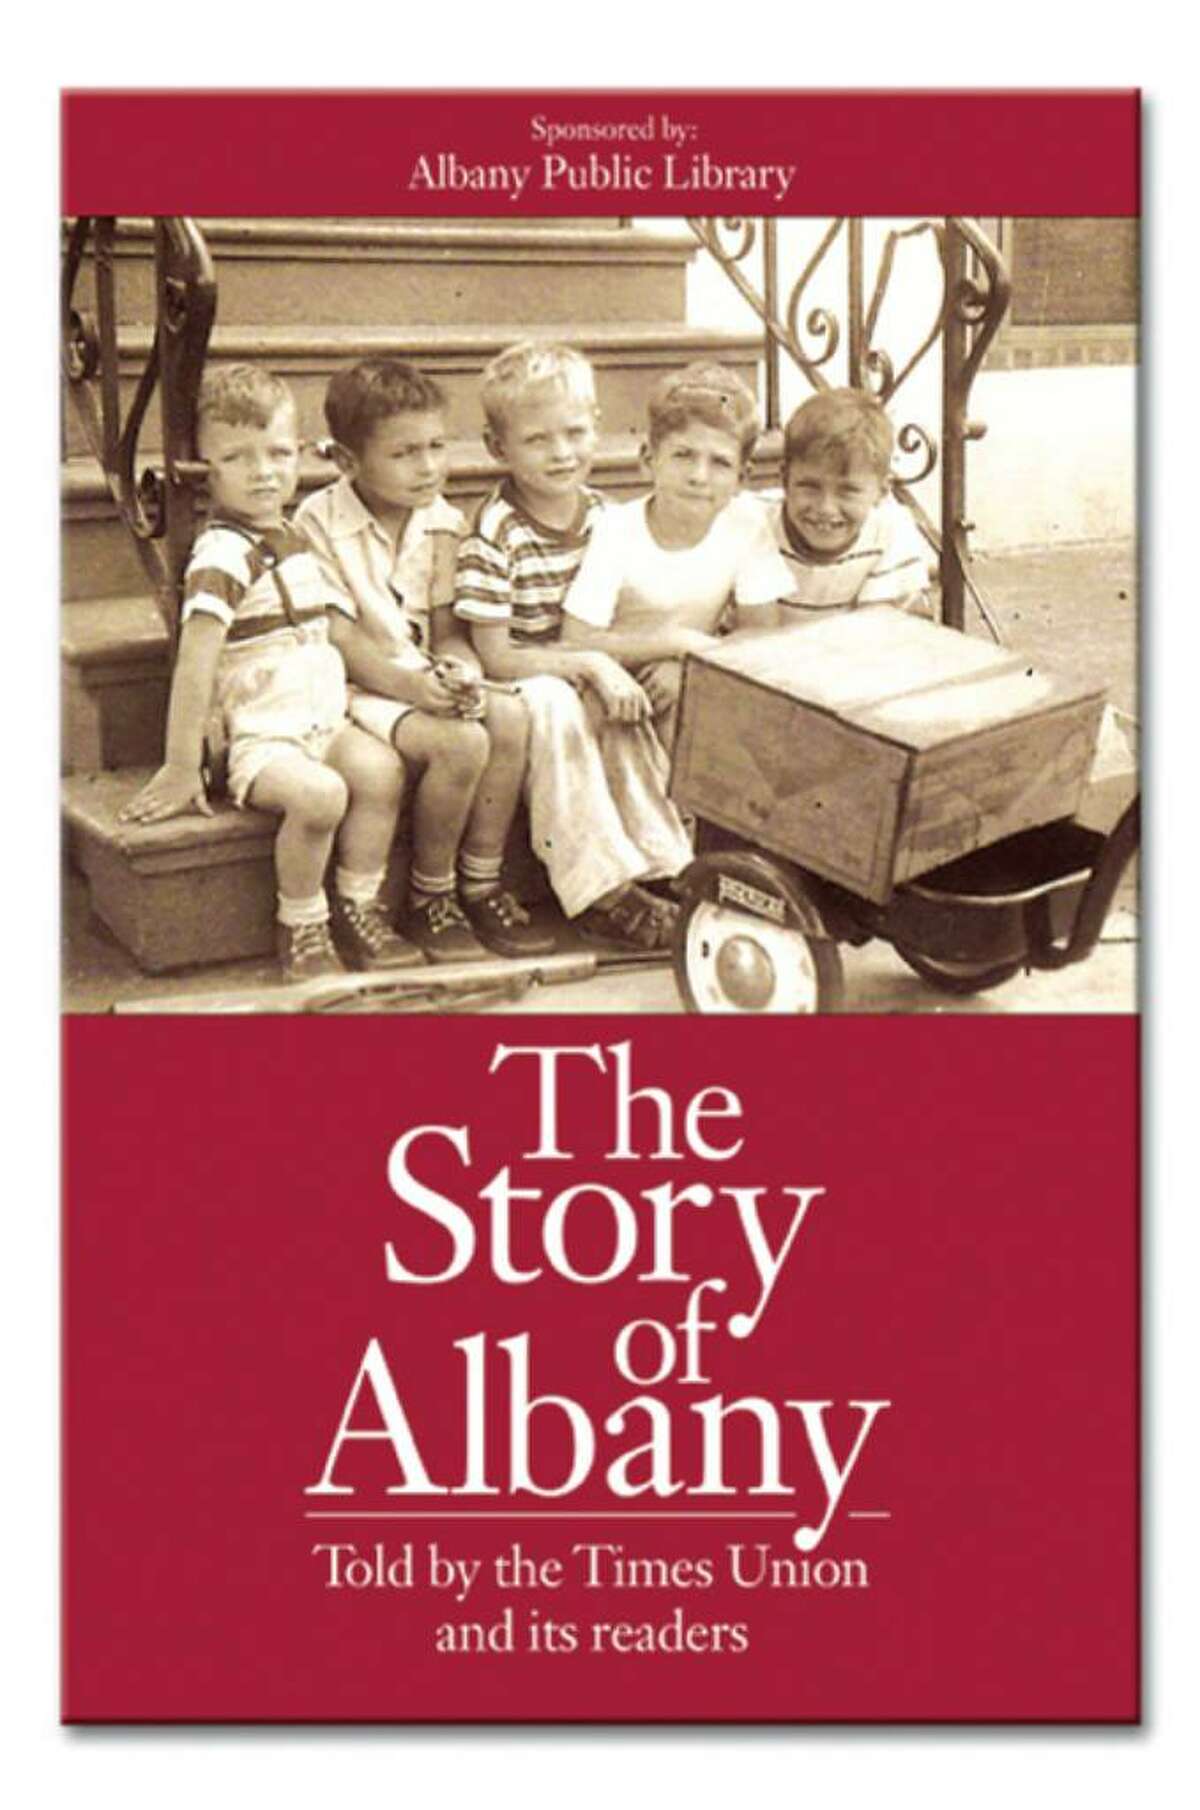 "The Story of Albany" can be downloaded for free or purchased online for $25.